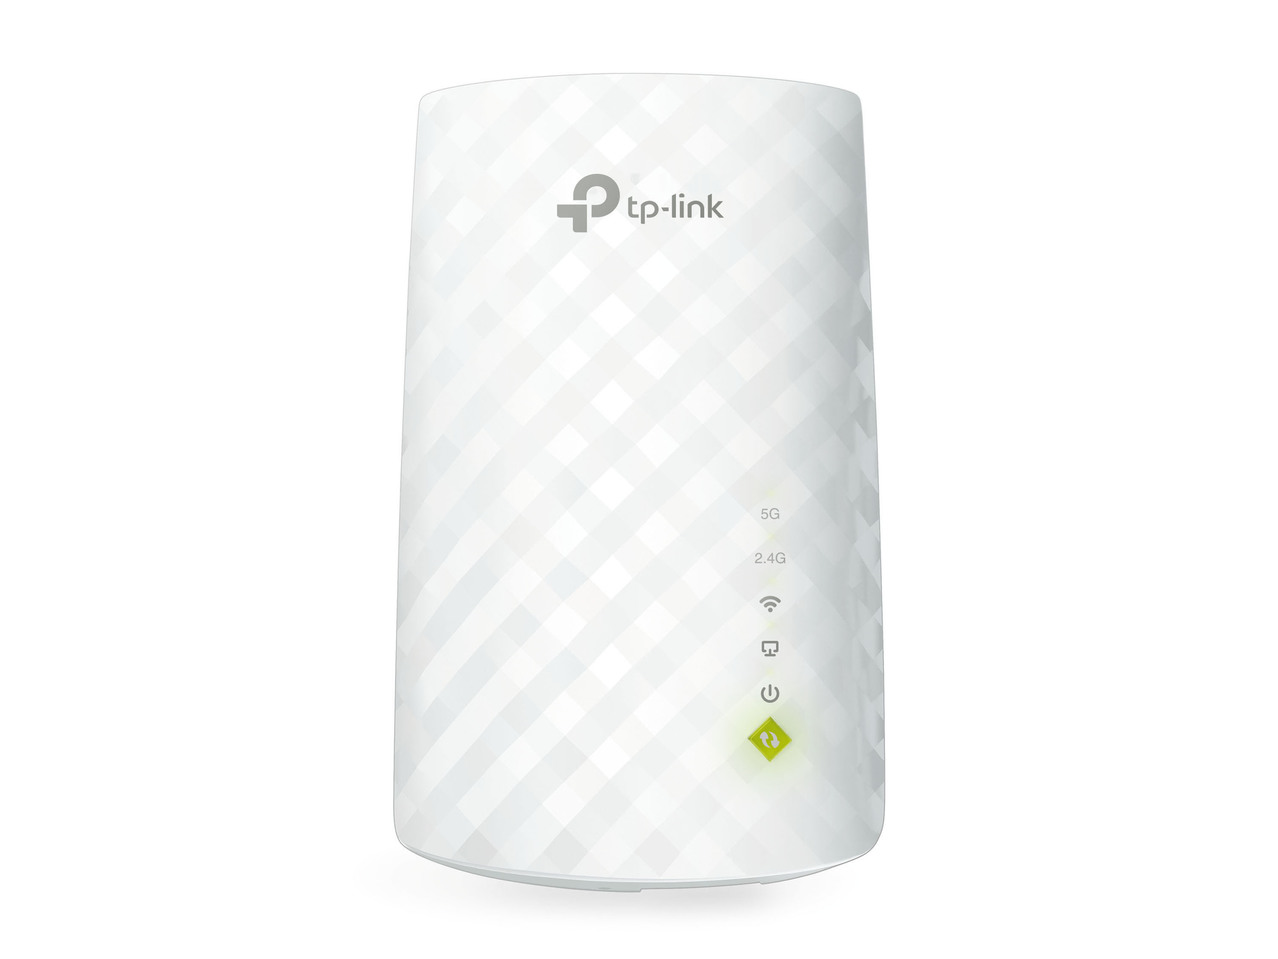 WLAN Dual Band Relay RE200 "TP-Link"